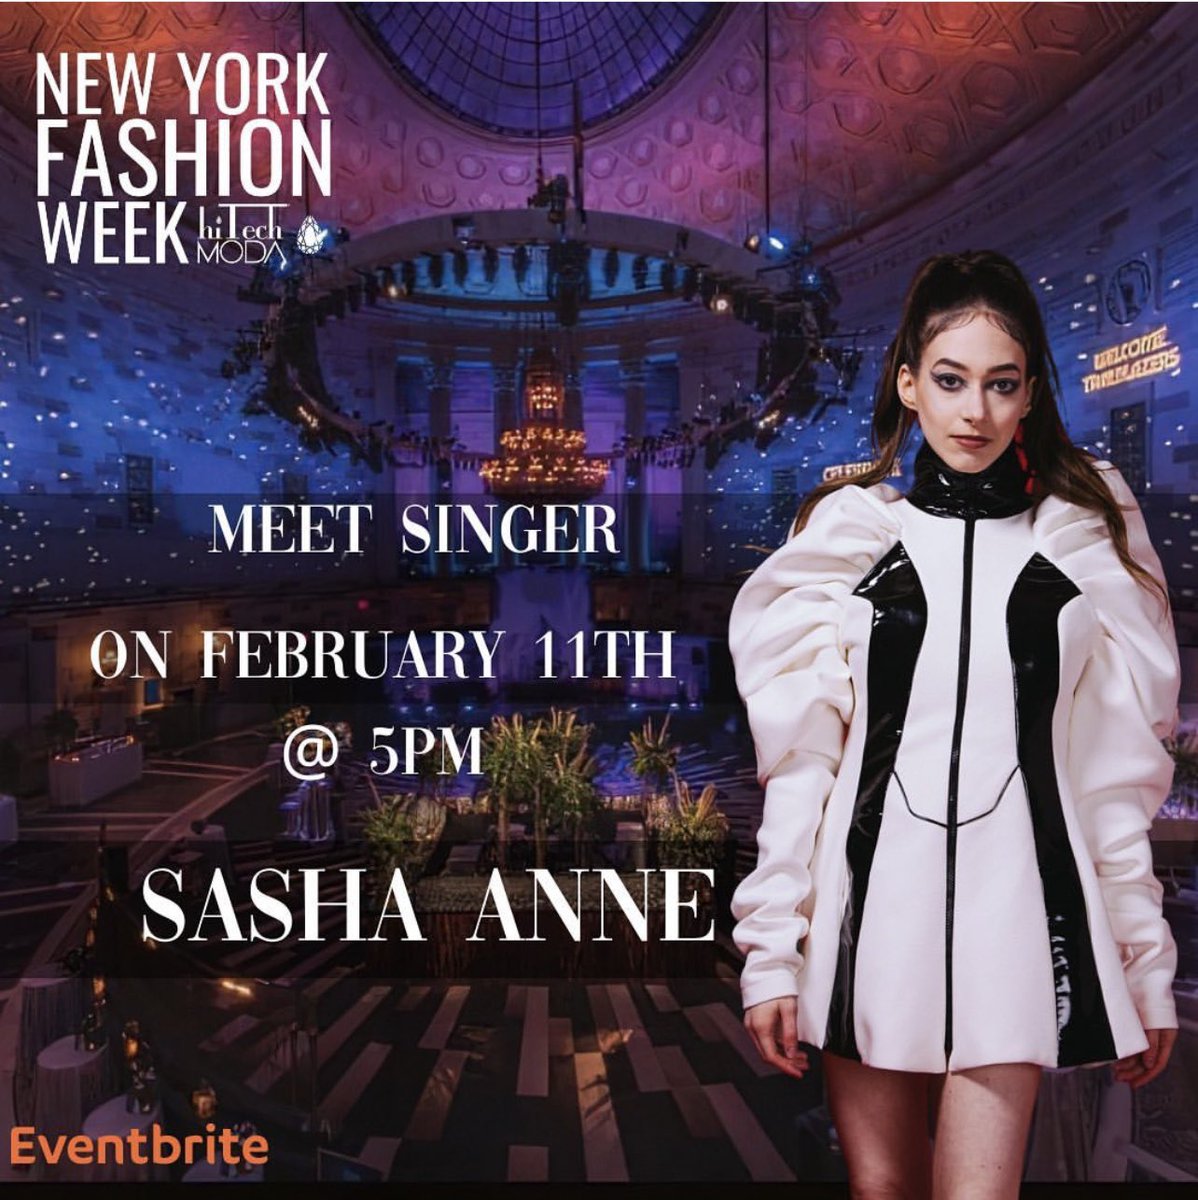 Looking forward to seeing everyone’s beautiful faces, Feb 11th at 5pm, Gotham Hall for NYFW! Get your tickets now with the link in my story!
Second show details coming soon! 💖🎶🥰

#sashaanne #liveperformance #catchmeimfalling #80ssong #prettypoison #jadestarling